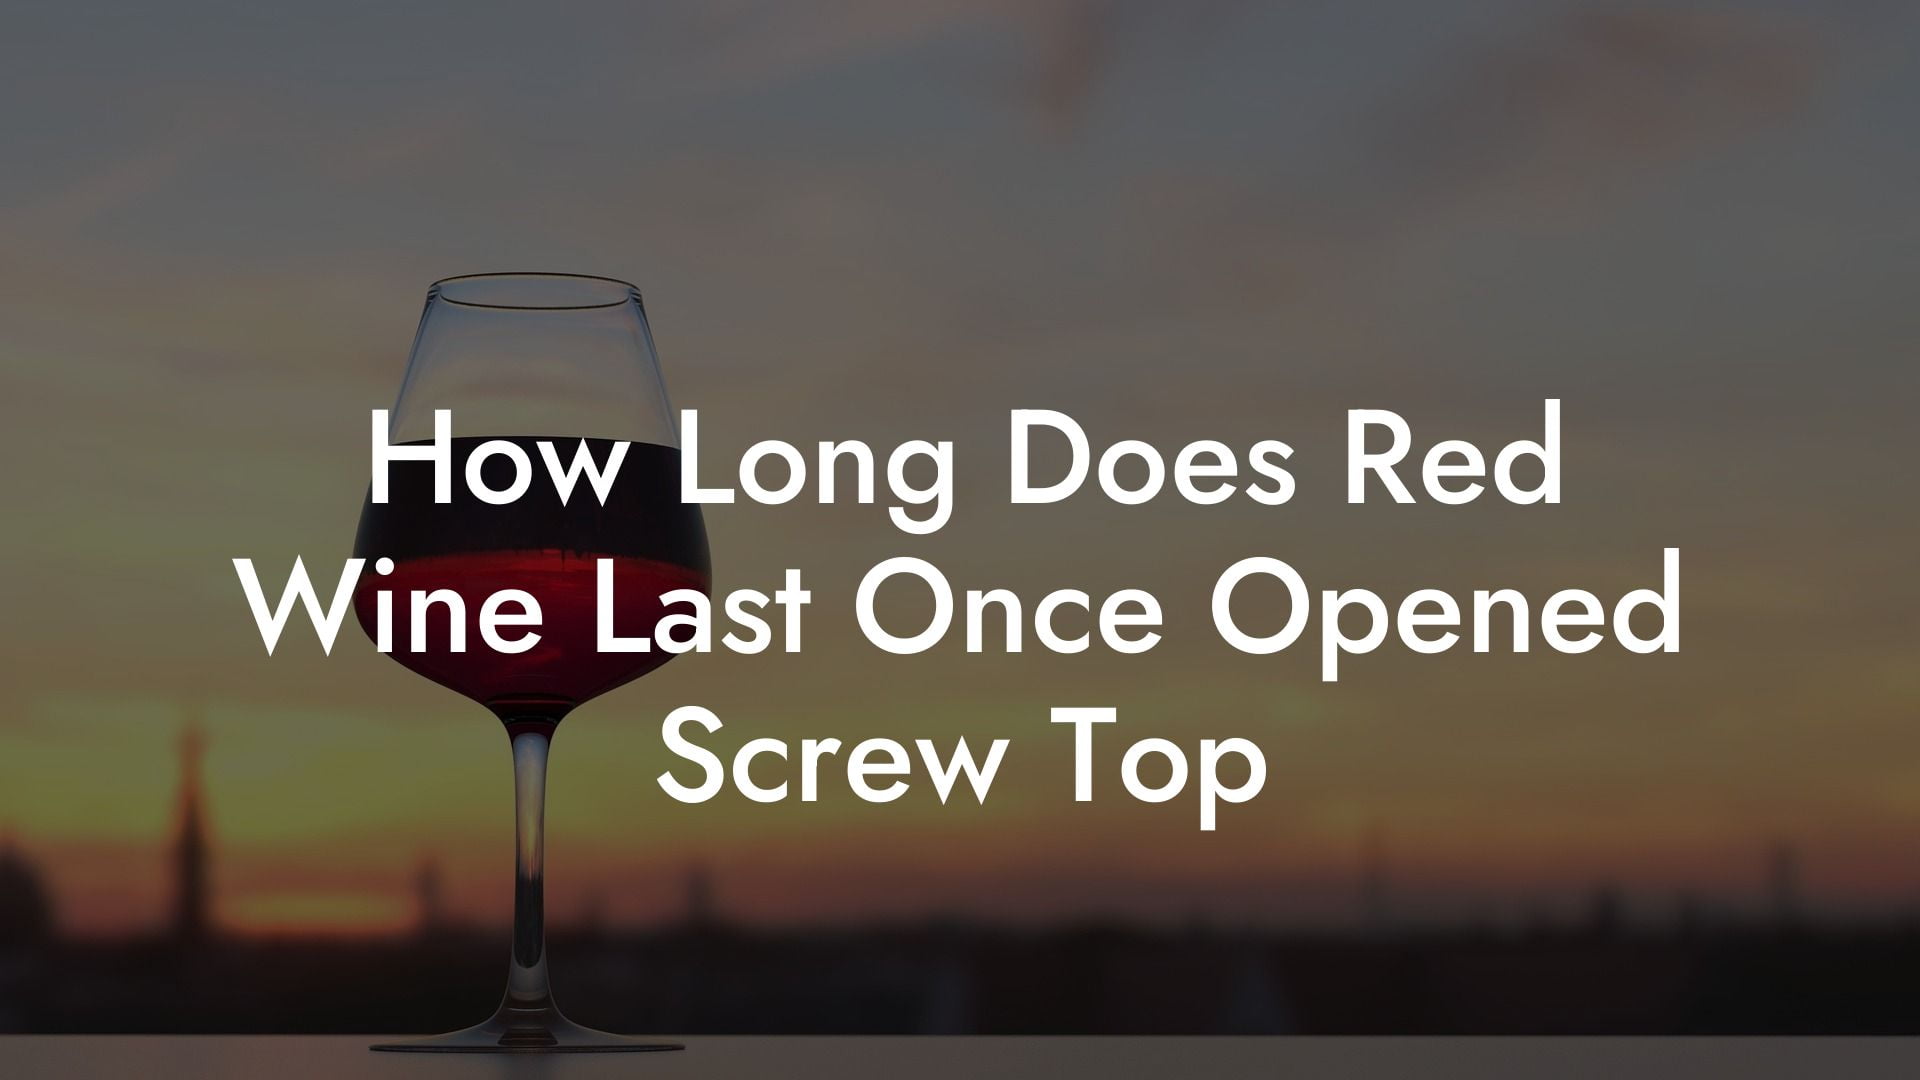 How Long Does Red Wine Last Once Opened Screw Top